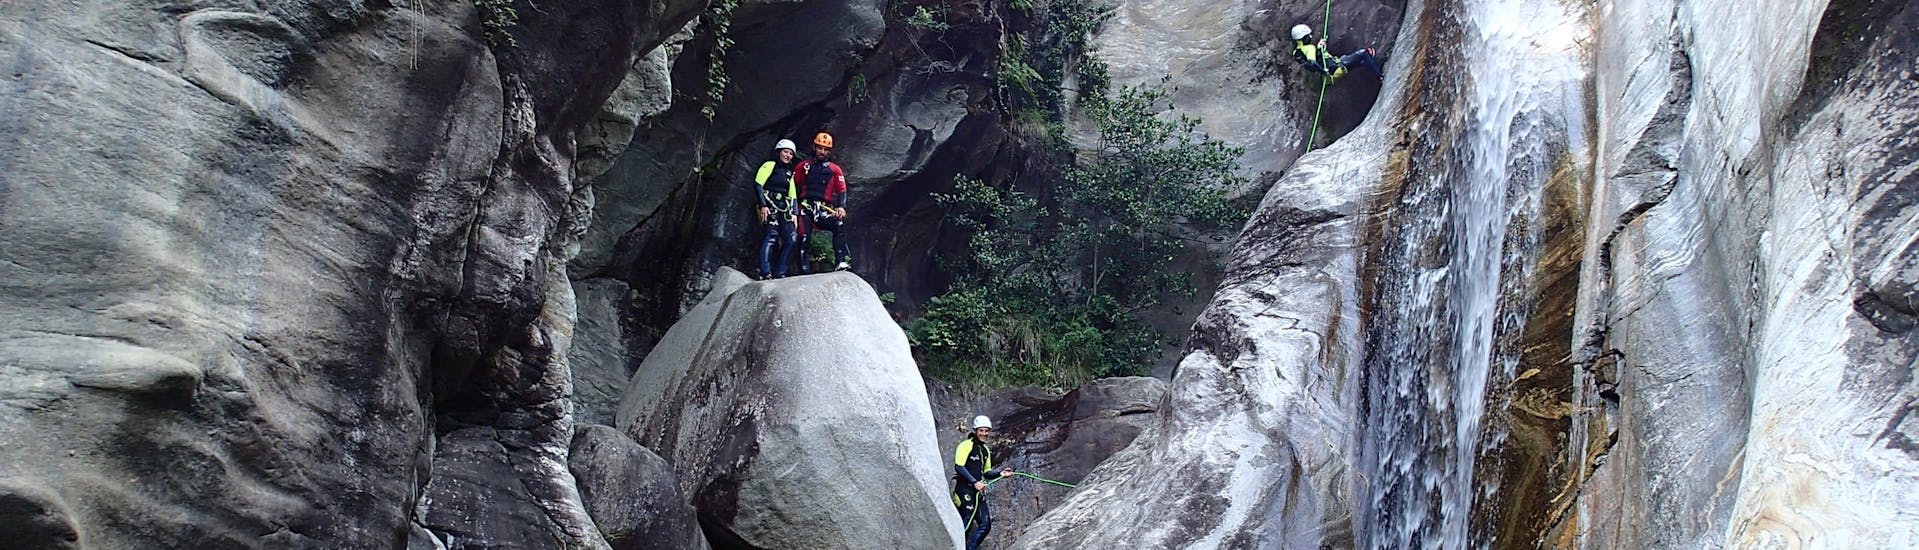 Pro Canyoning in Val Grande in Valle Maggia, Ticino.